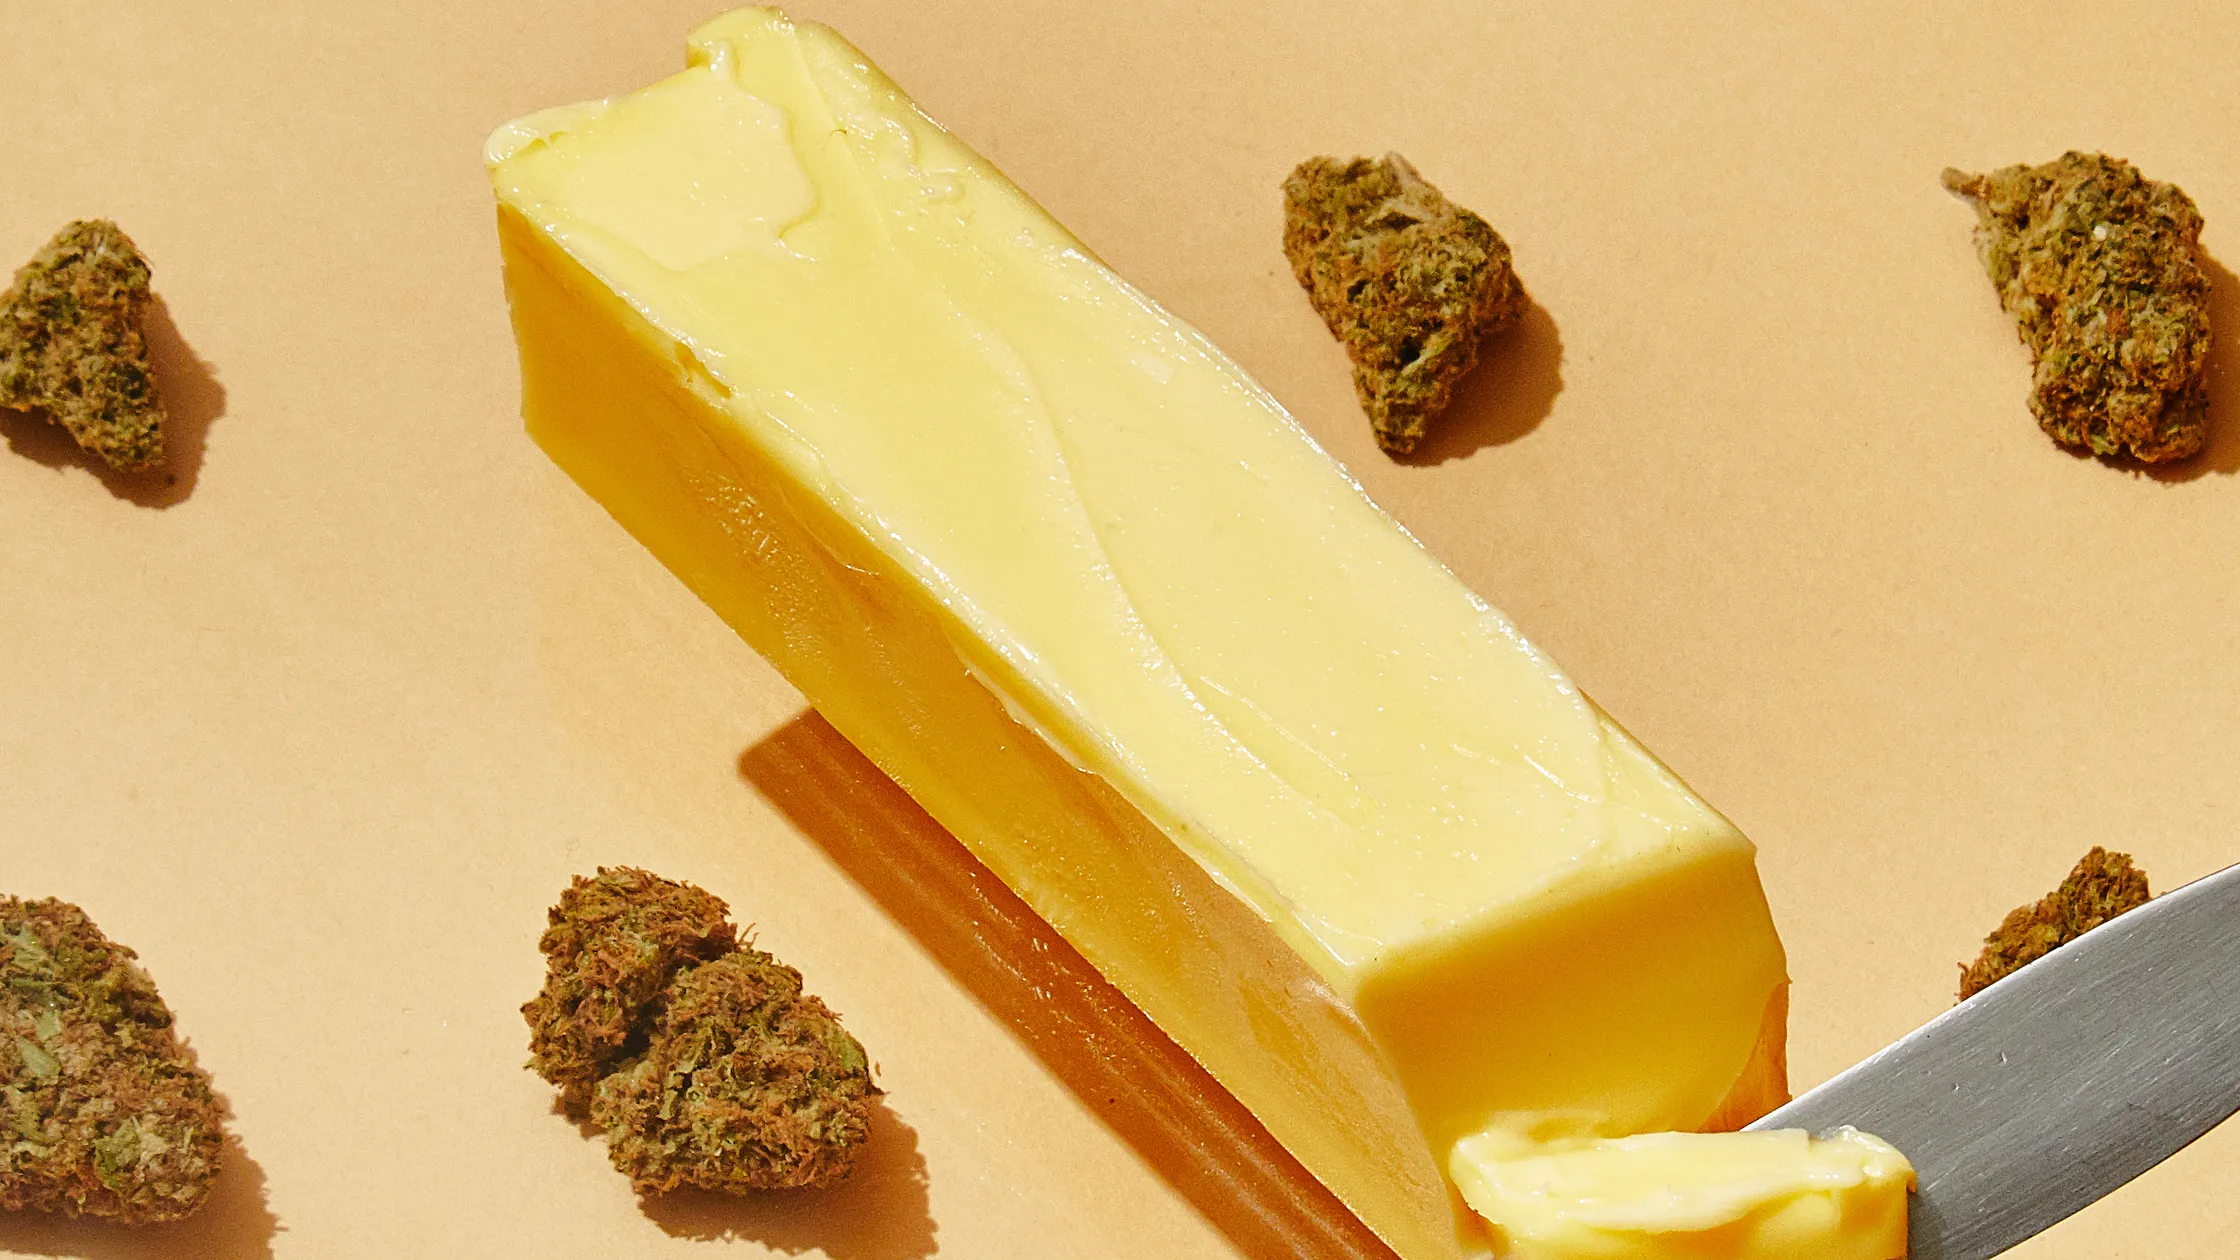 How to Make Cannabutter: A Step-by-Step Guide